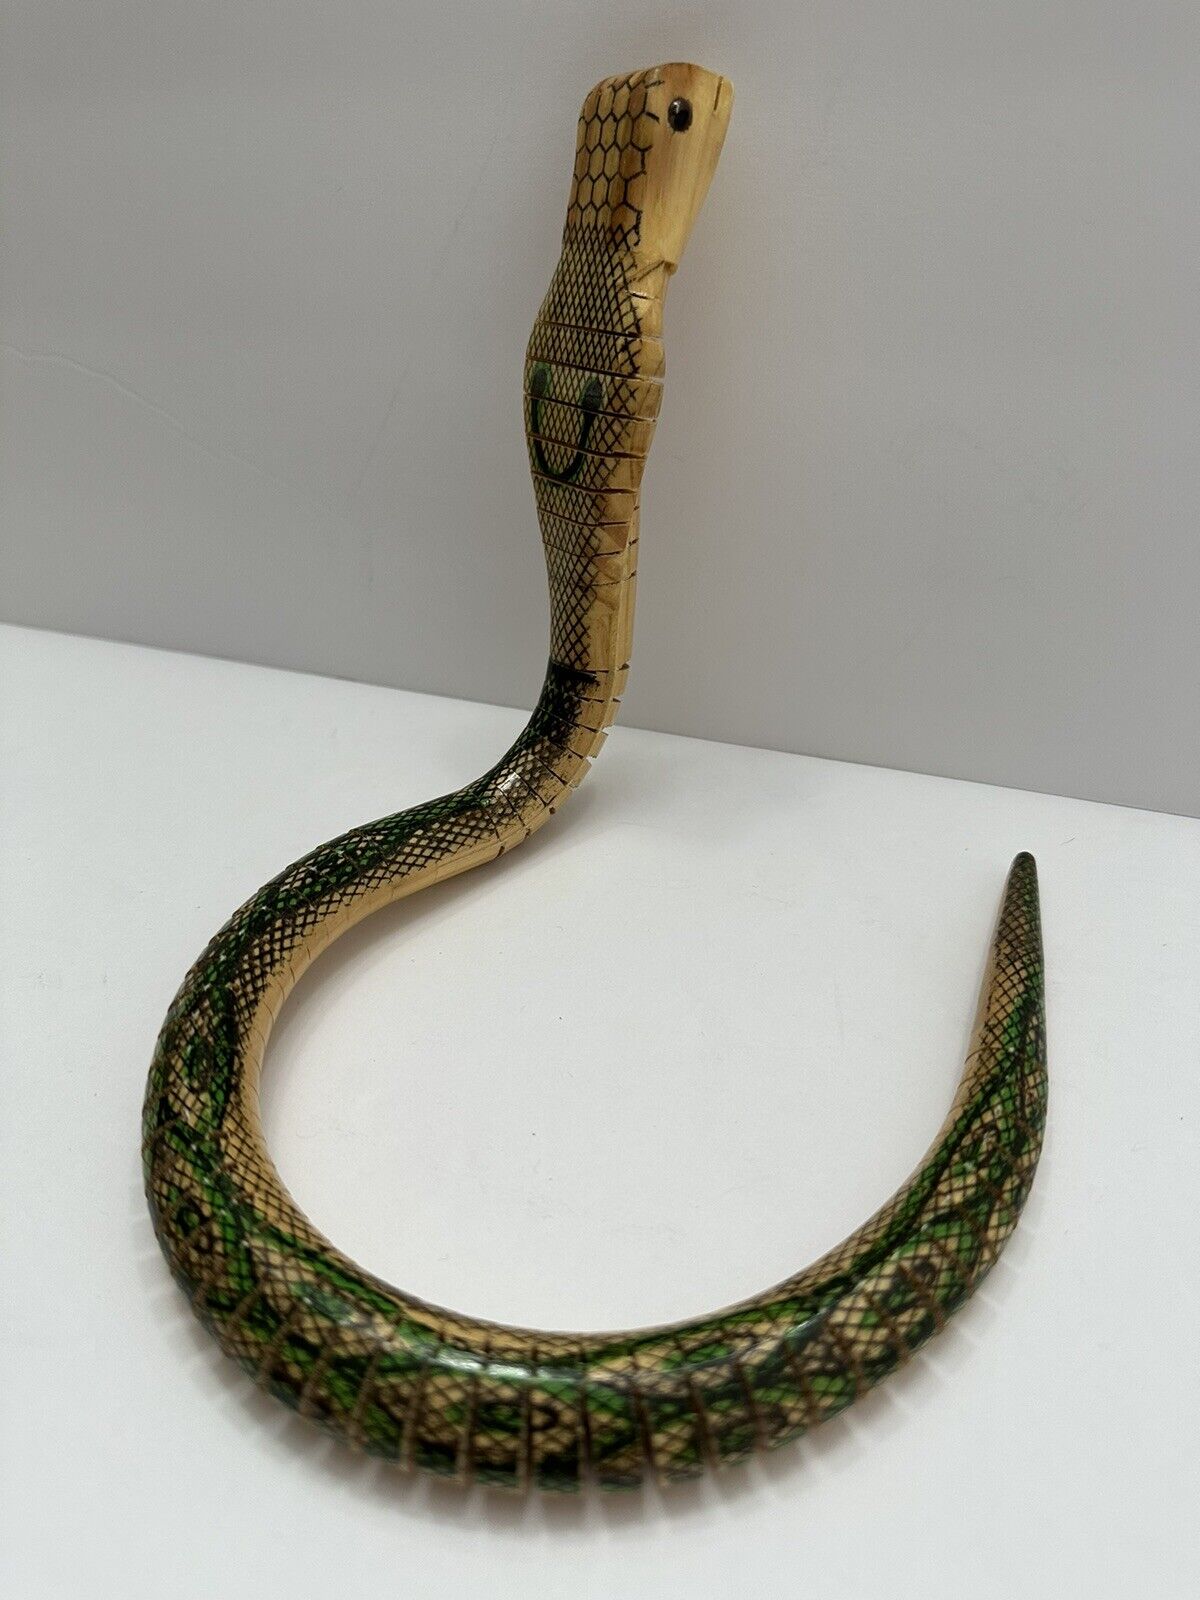 Vintage Reticulated Wooden Snake Handmade Folk Art Flexible With Realistic Move